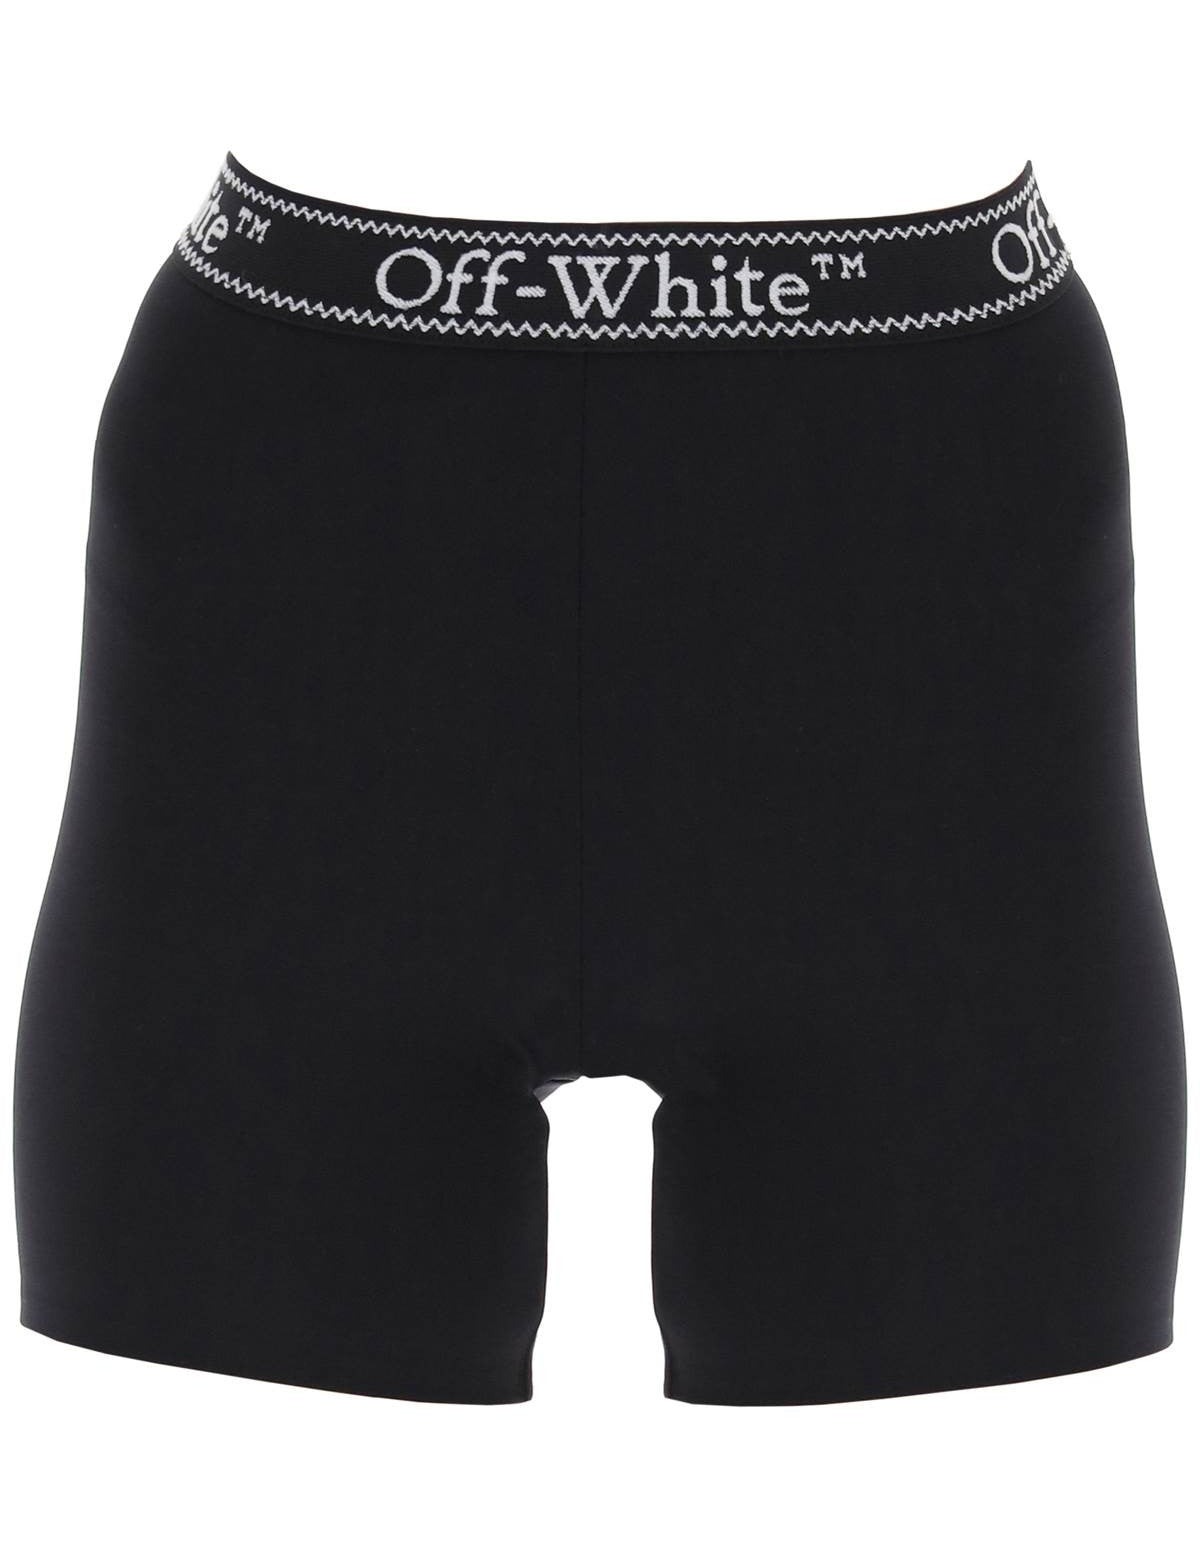 off-white-sporty-shorts-with-branded-stripe.jpg